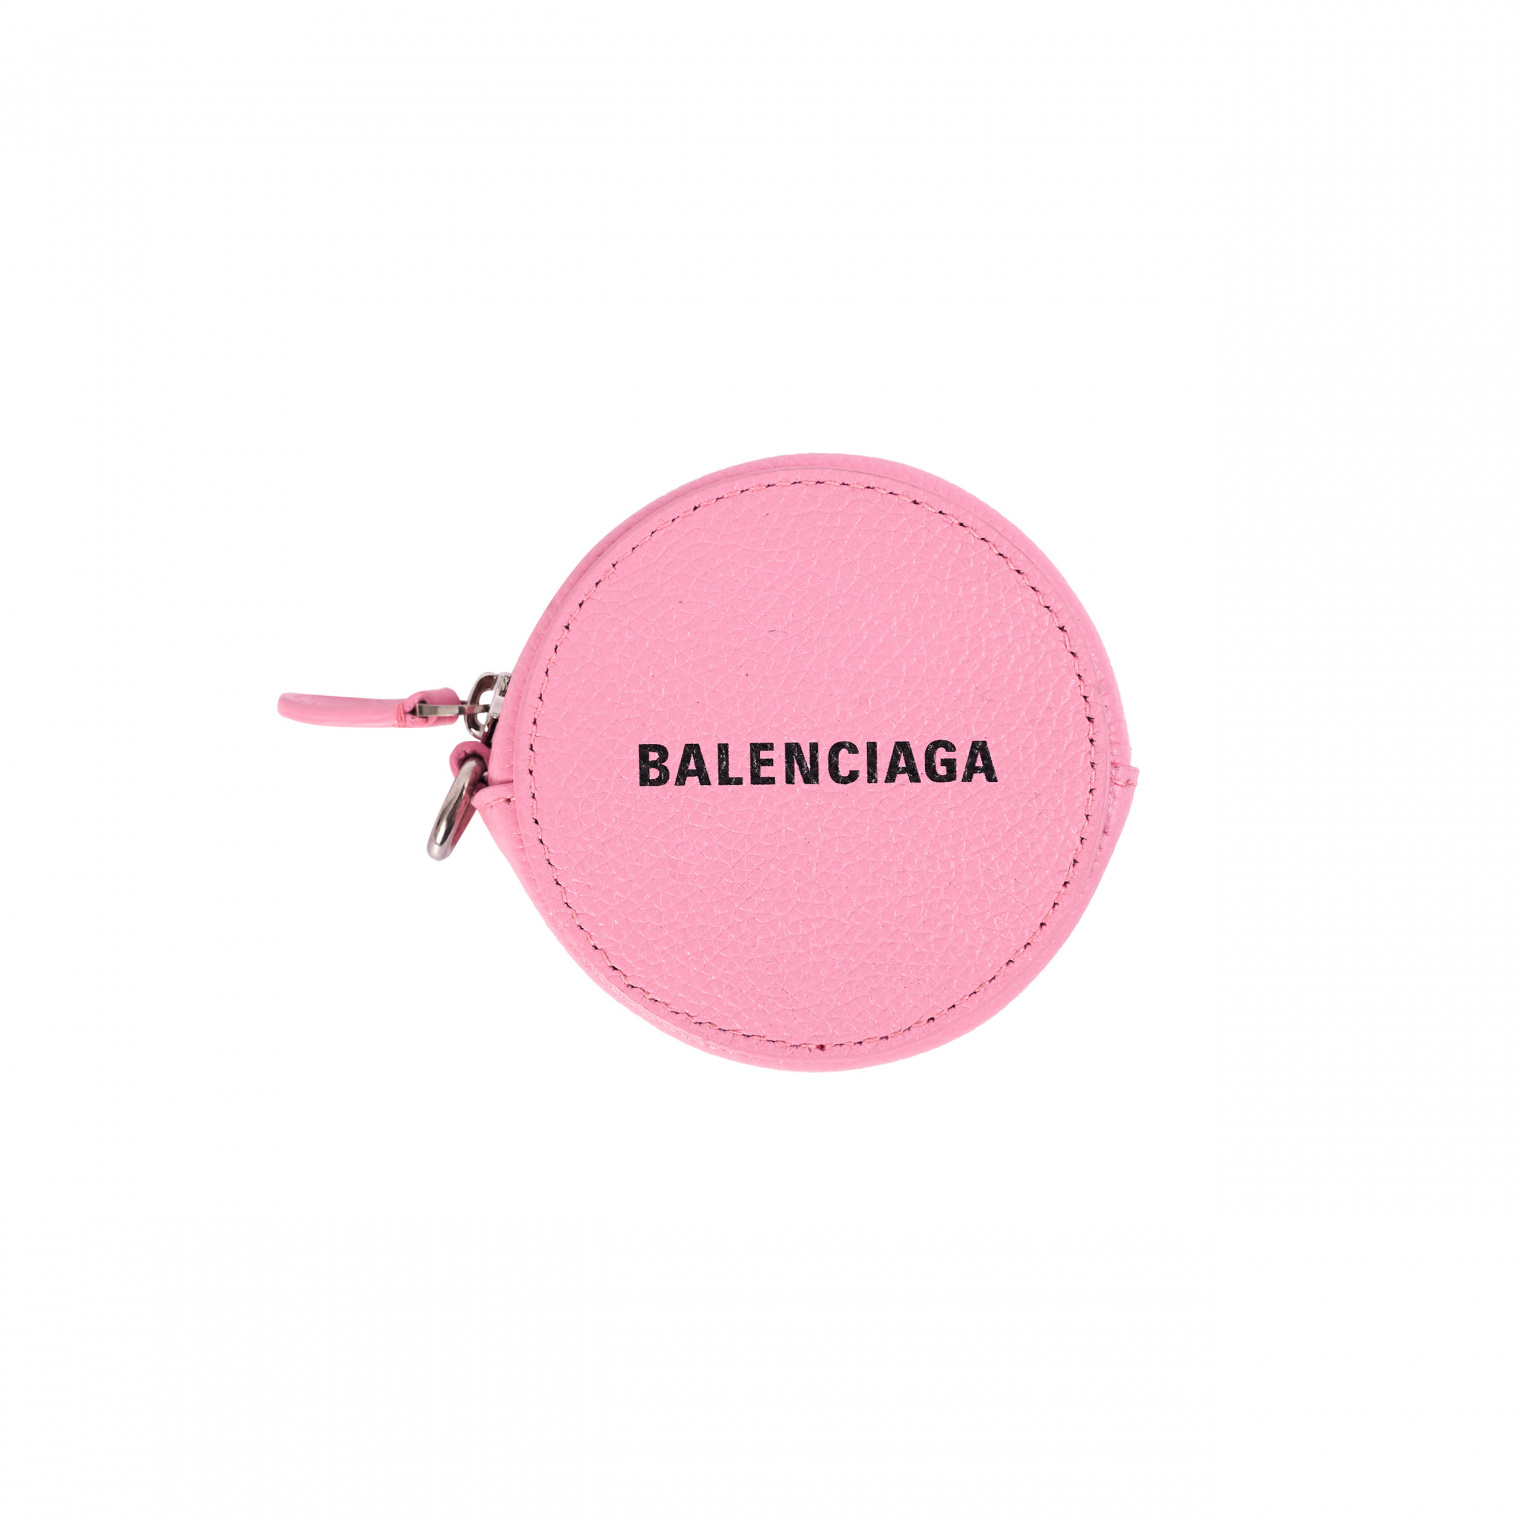 Balenciaga Cash Wallet in Pink Grained Leather